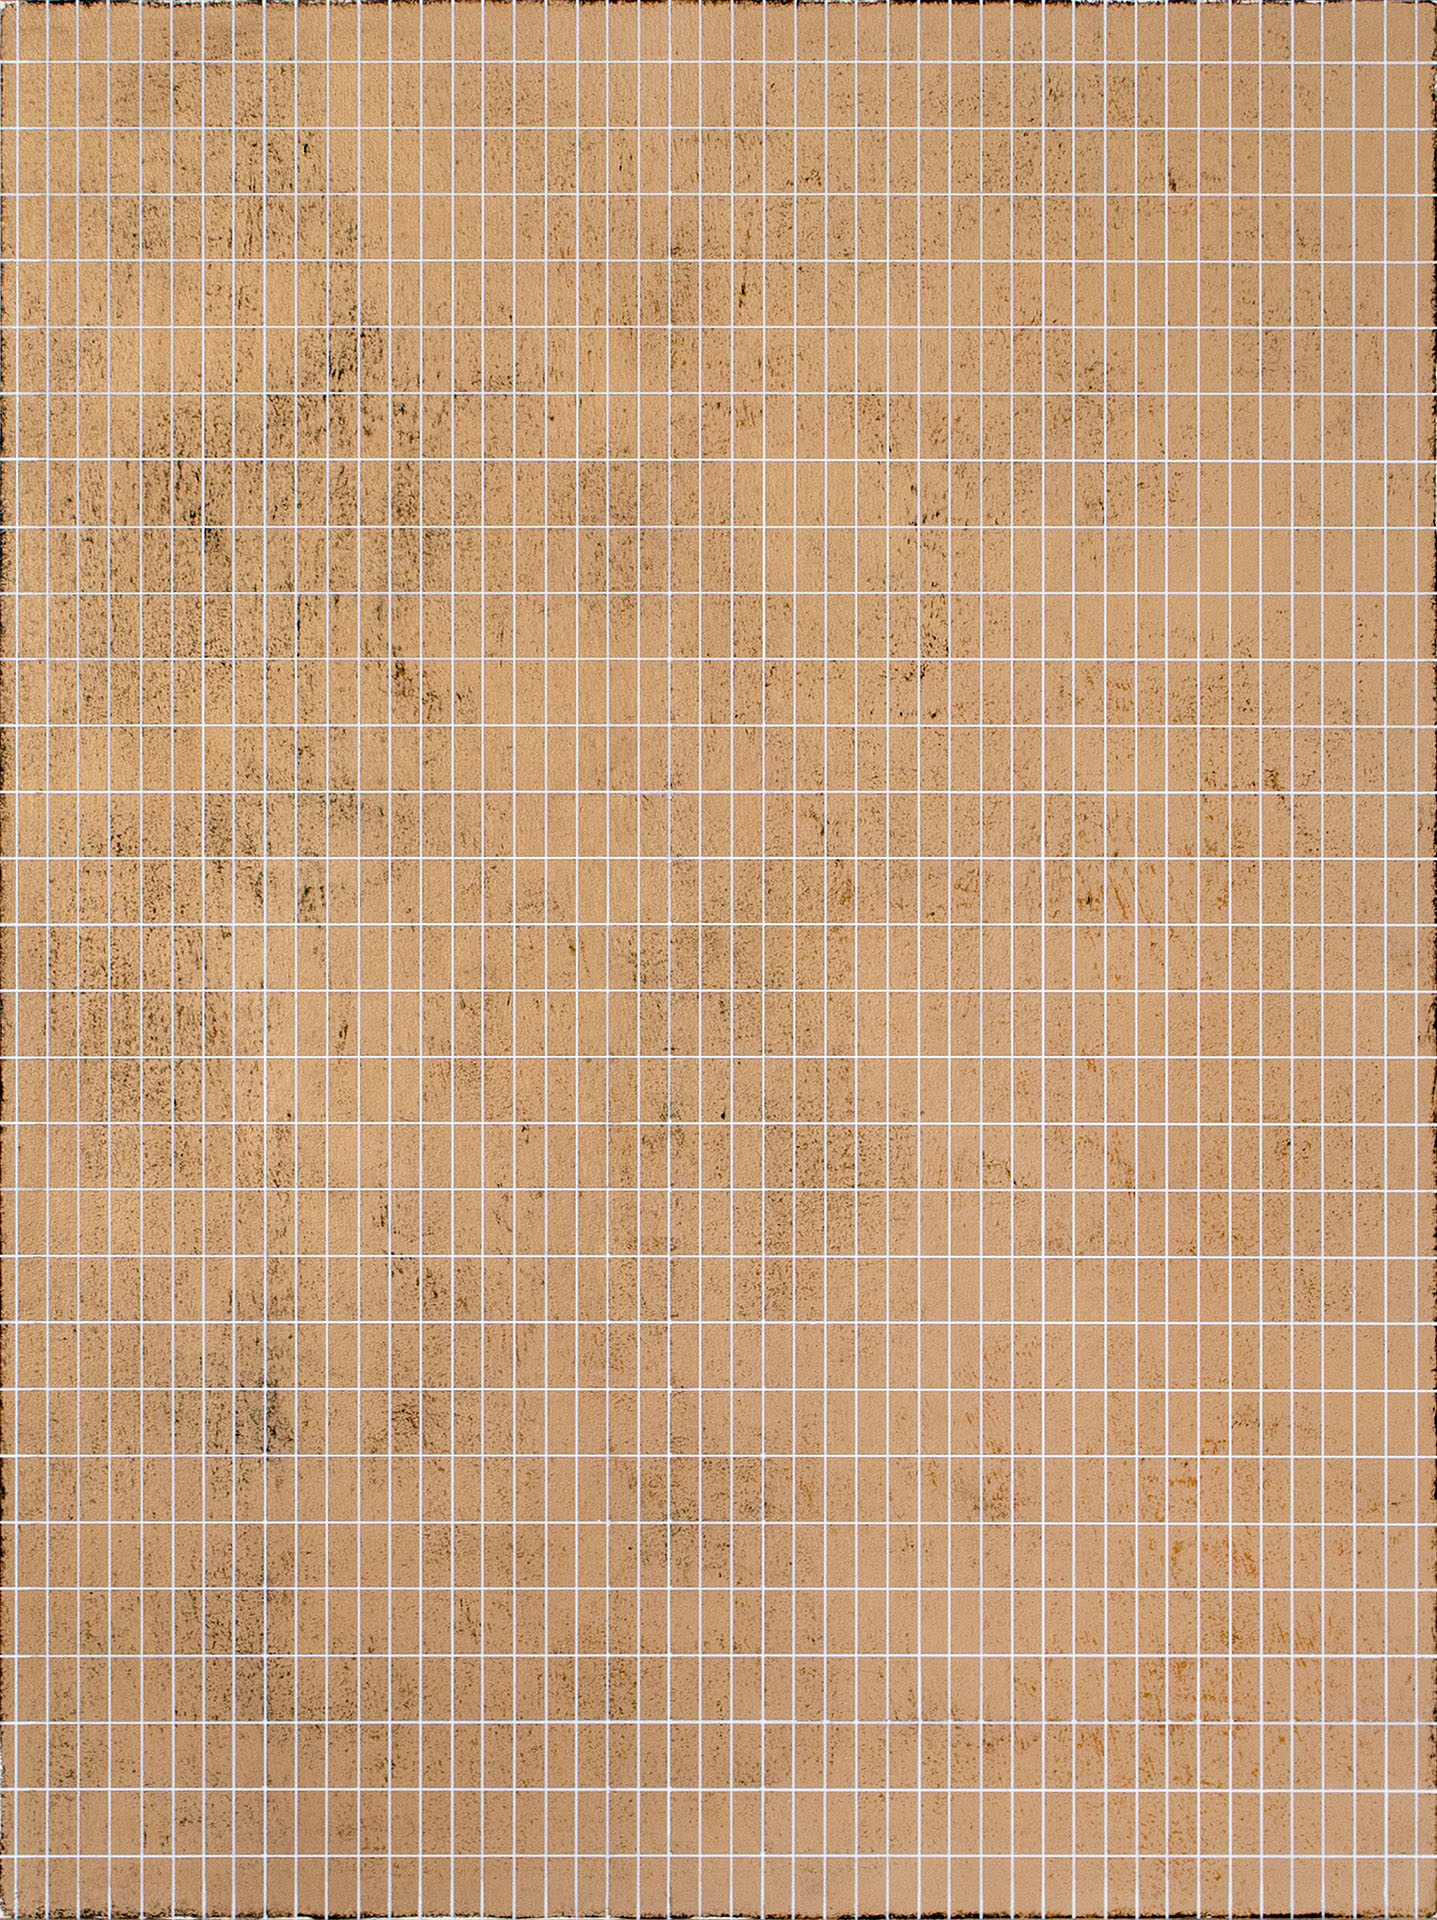 Gold Grid, 2016, acrylic on board, 435 x 325mm, private collection